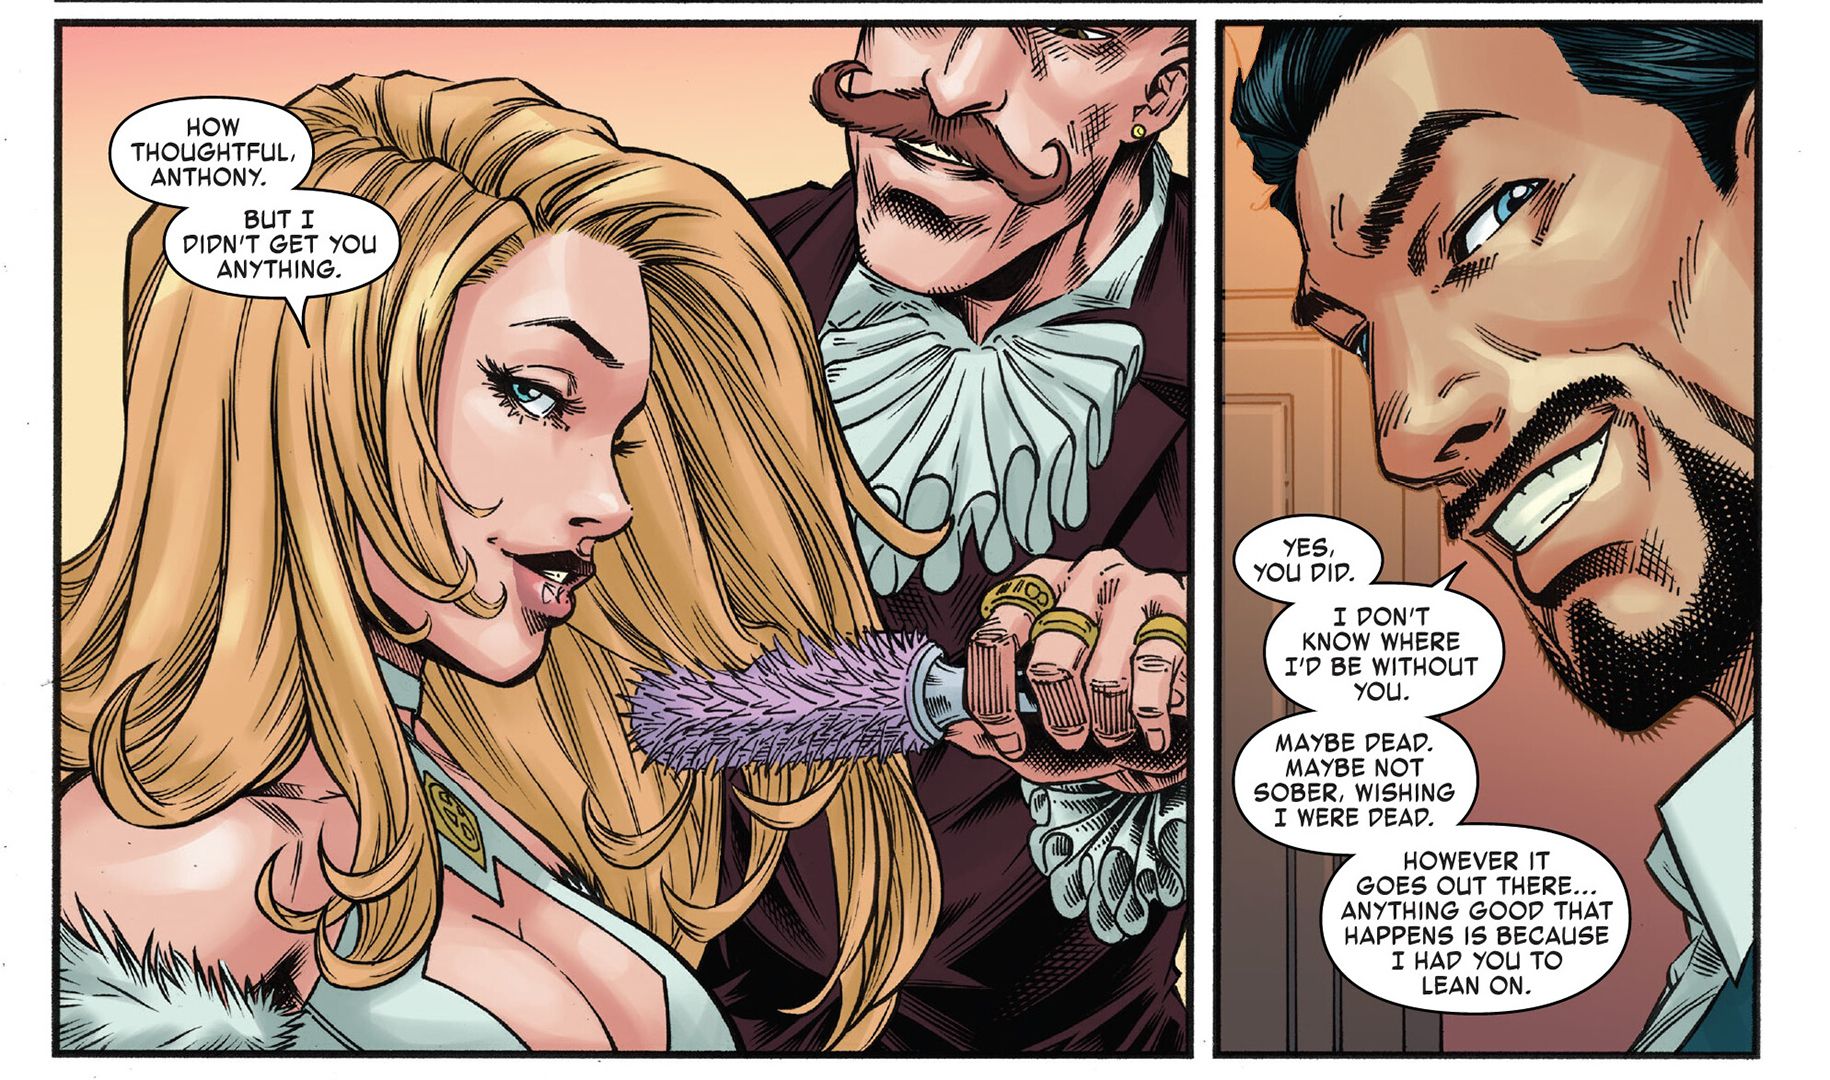 Invincible Iron Man #15, Tony Stark tells Emma Frost she's given him support & he doesn't know where he'd be without her.